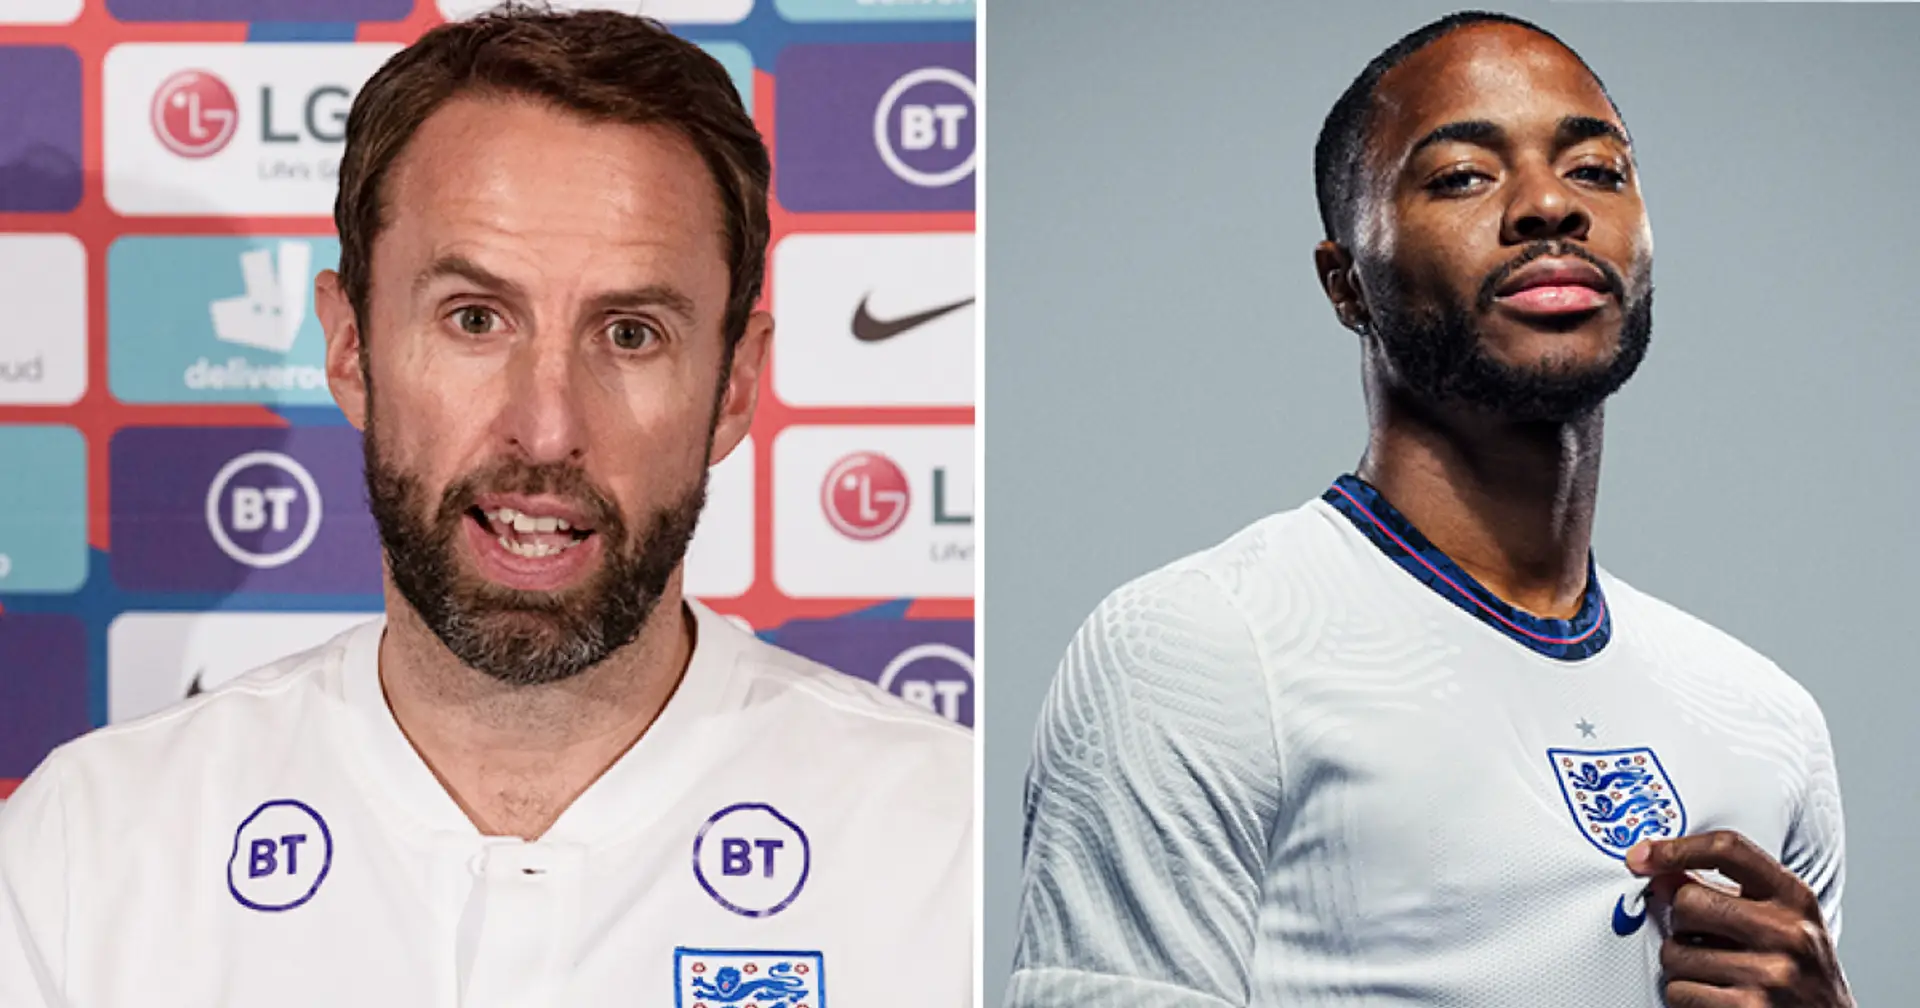 Southgate slammed for decision on Sterling and 3 more under-radar stories at Chelsea